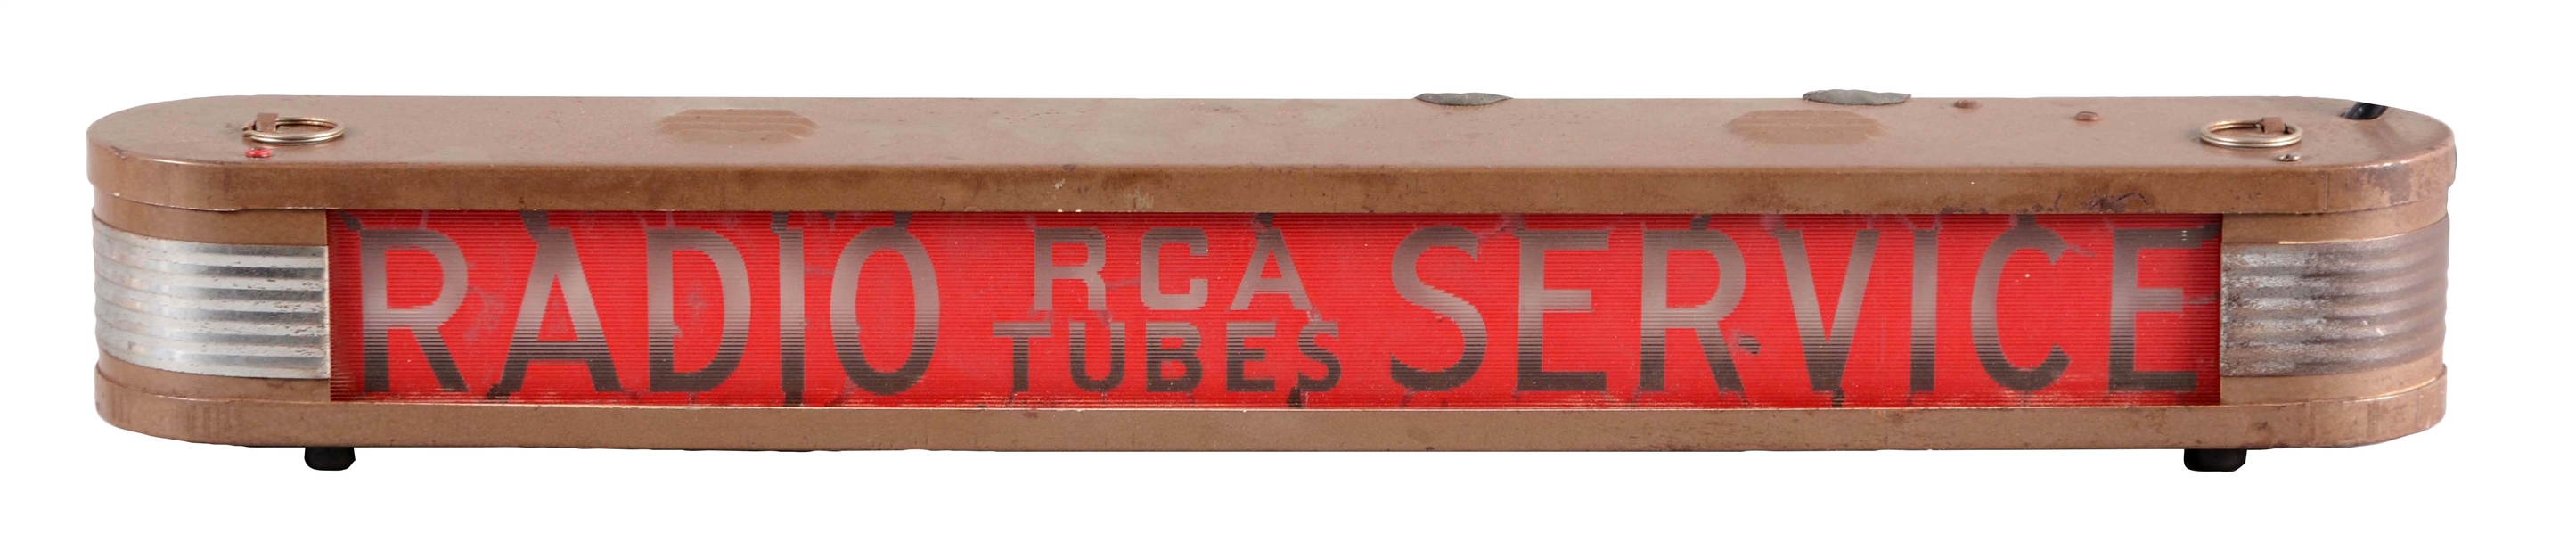 RCA RADIO SERVICE GLASS FACE LIGHT UP STORE DISPLAY SIGN.